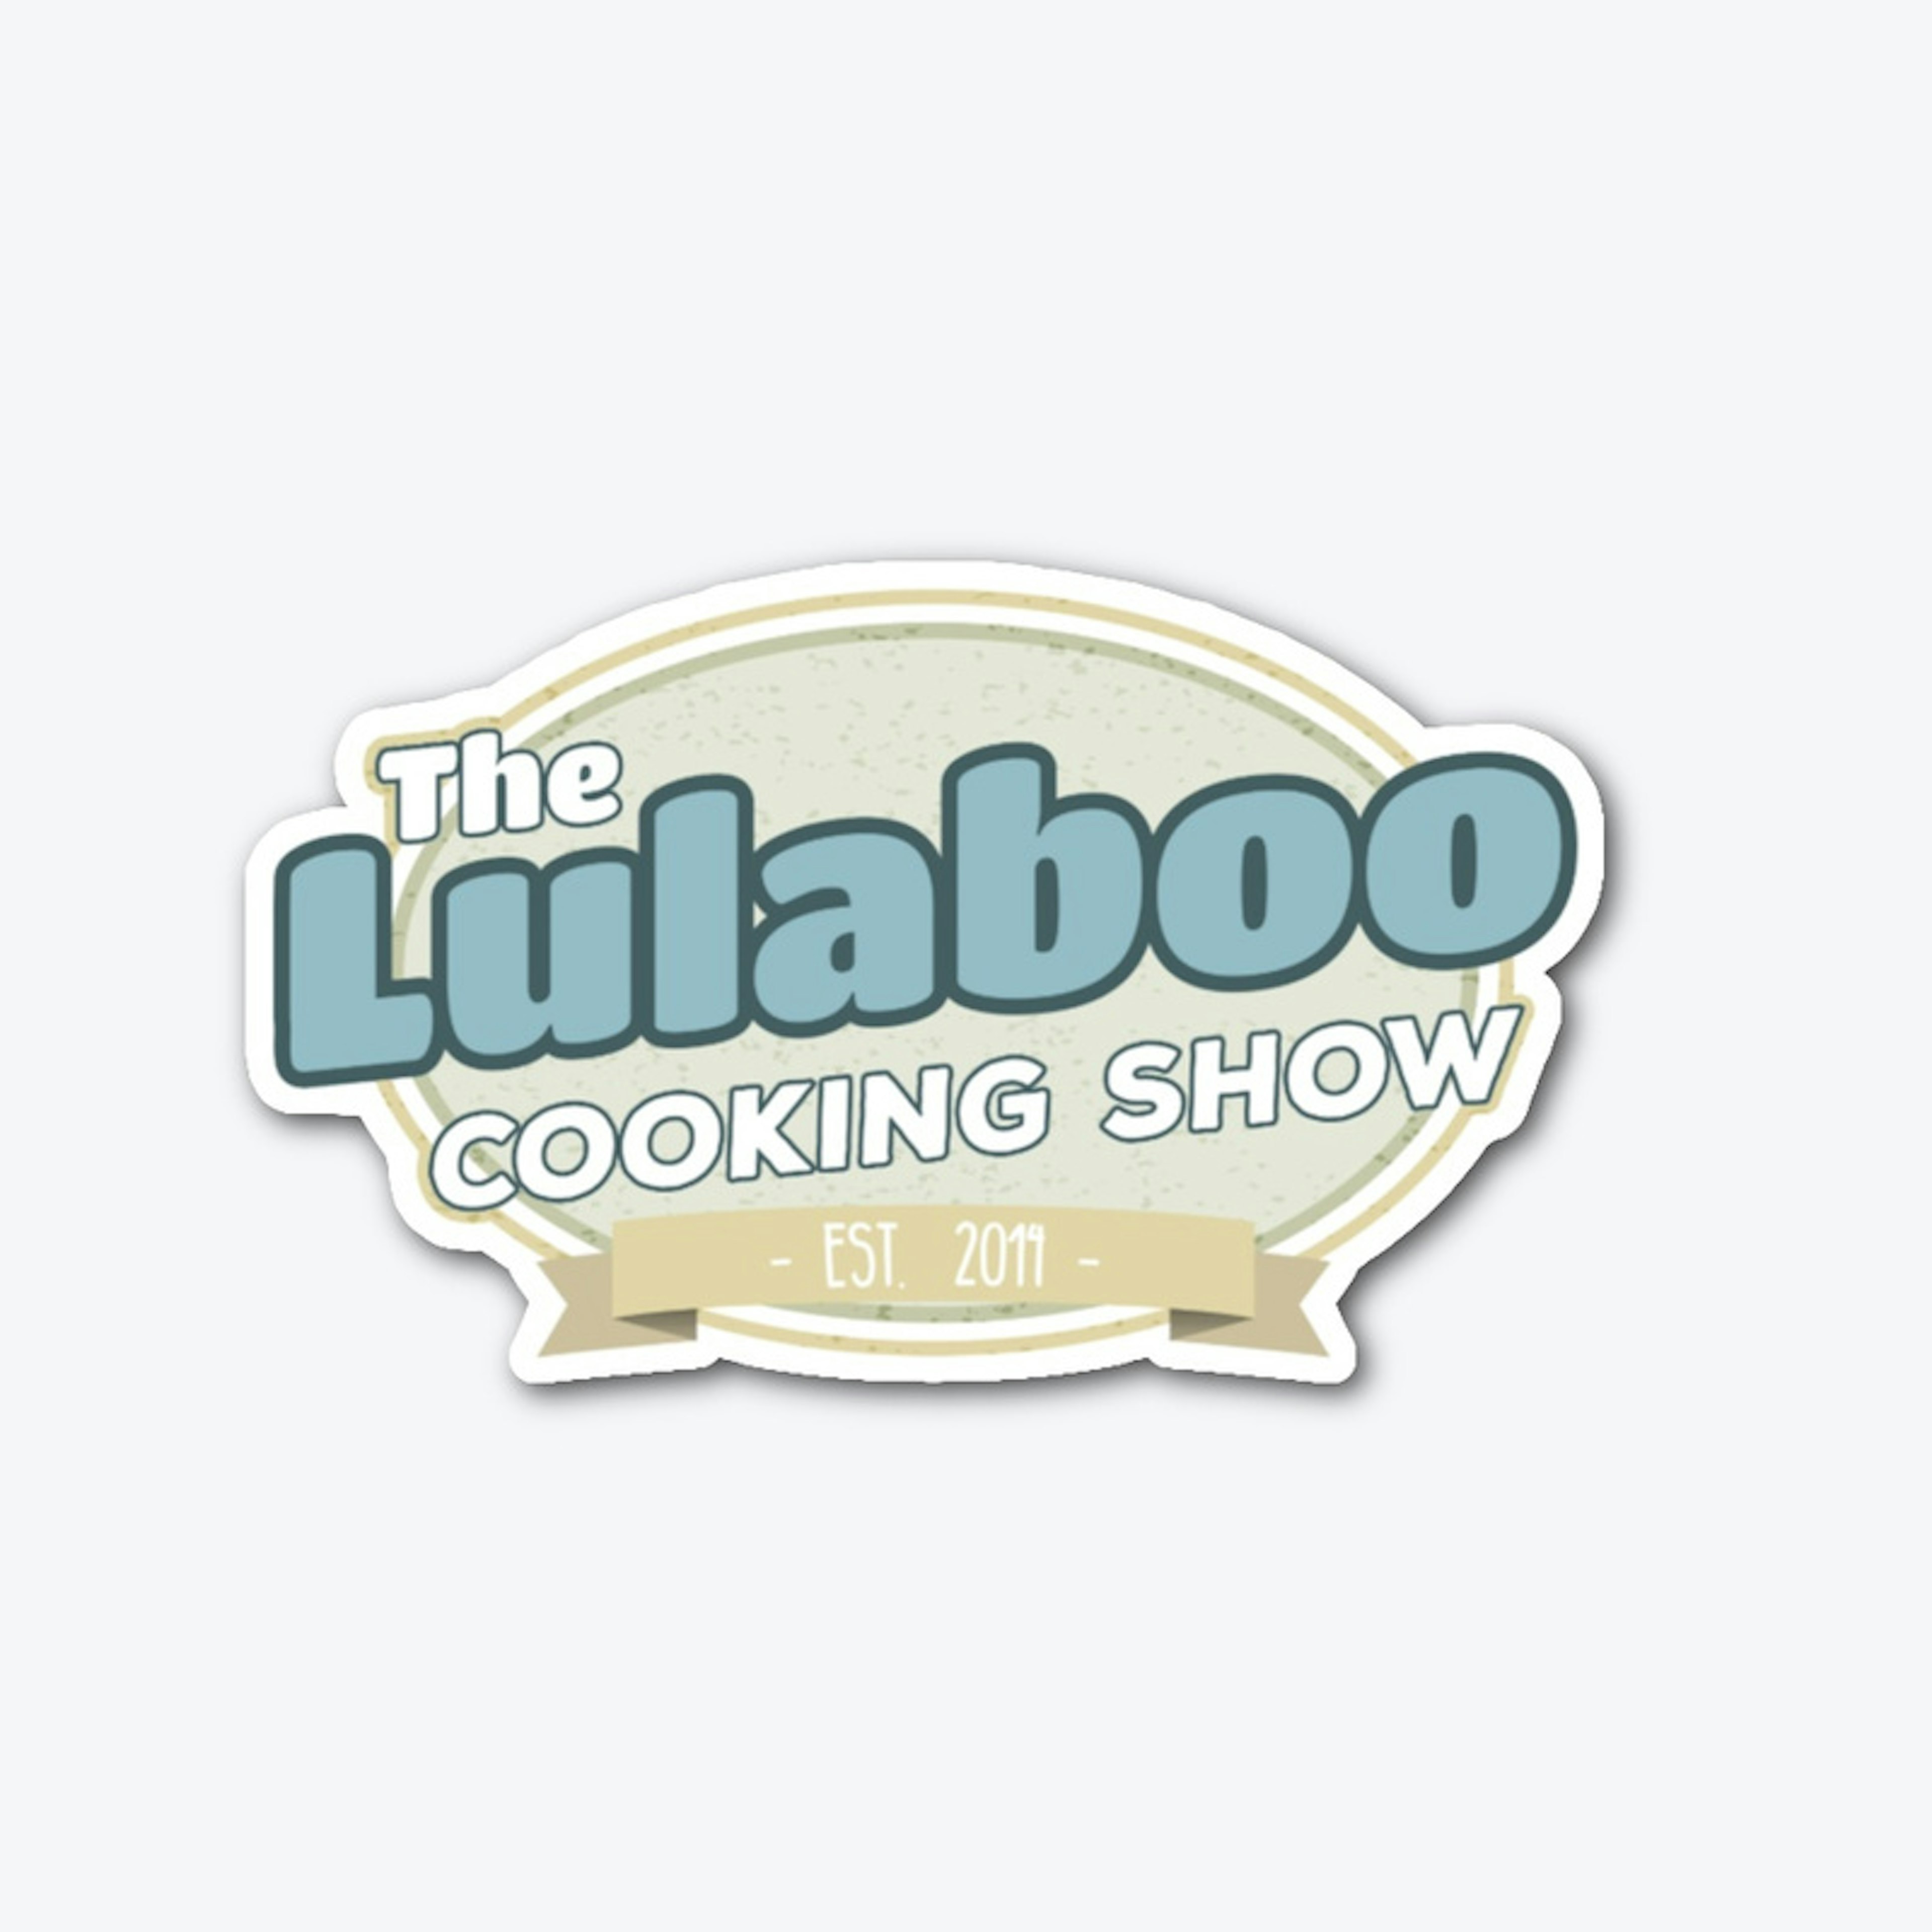 The Lulaboo Cooking Show